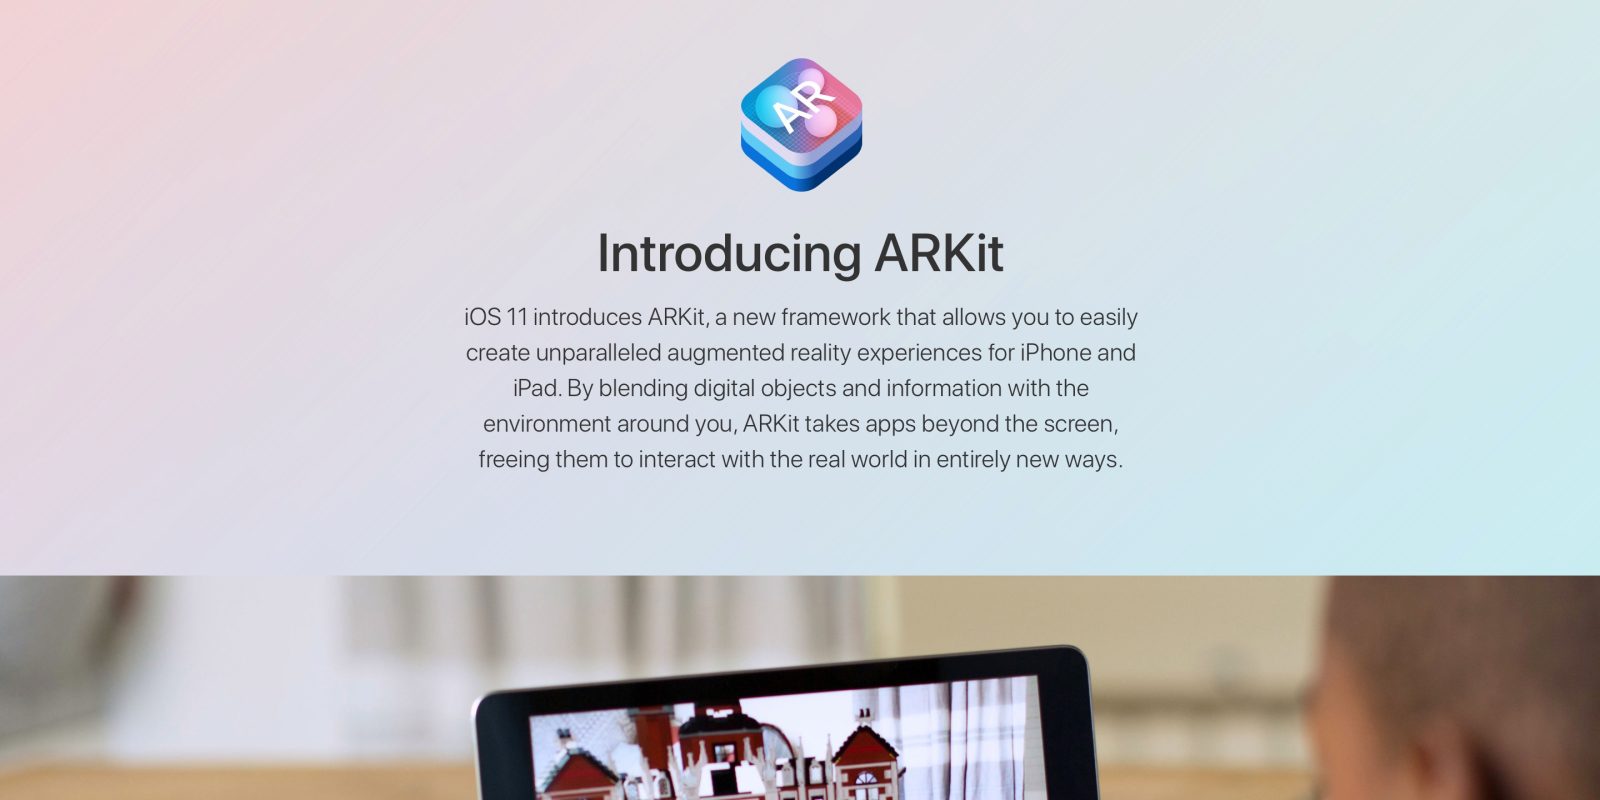 Apple Shares Detailed Human ARKit Guidelines for Developers